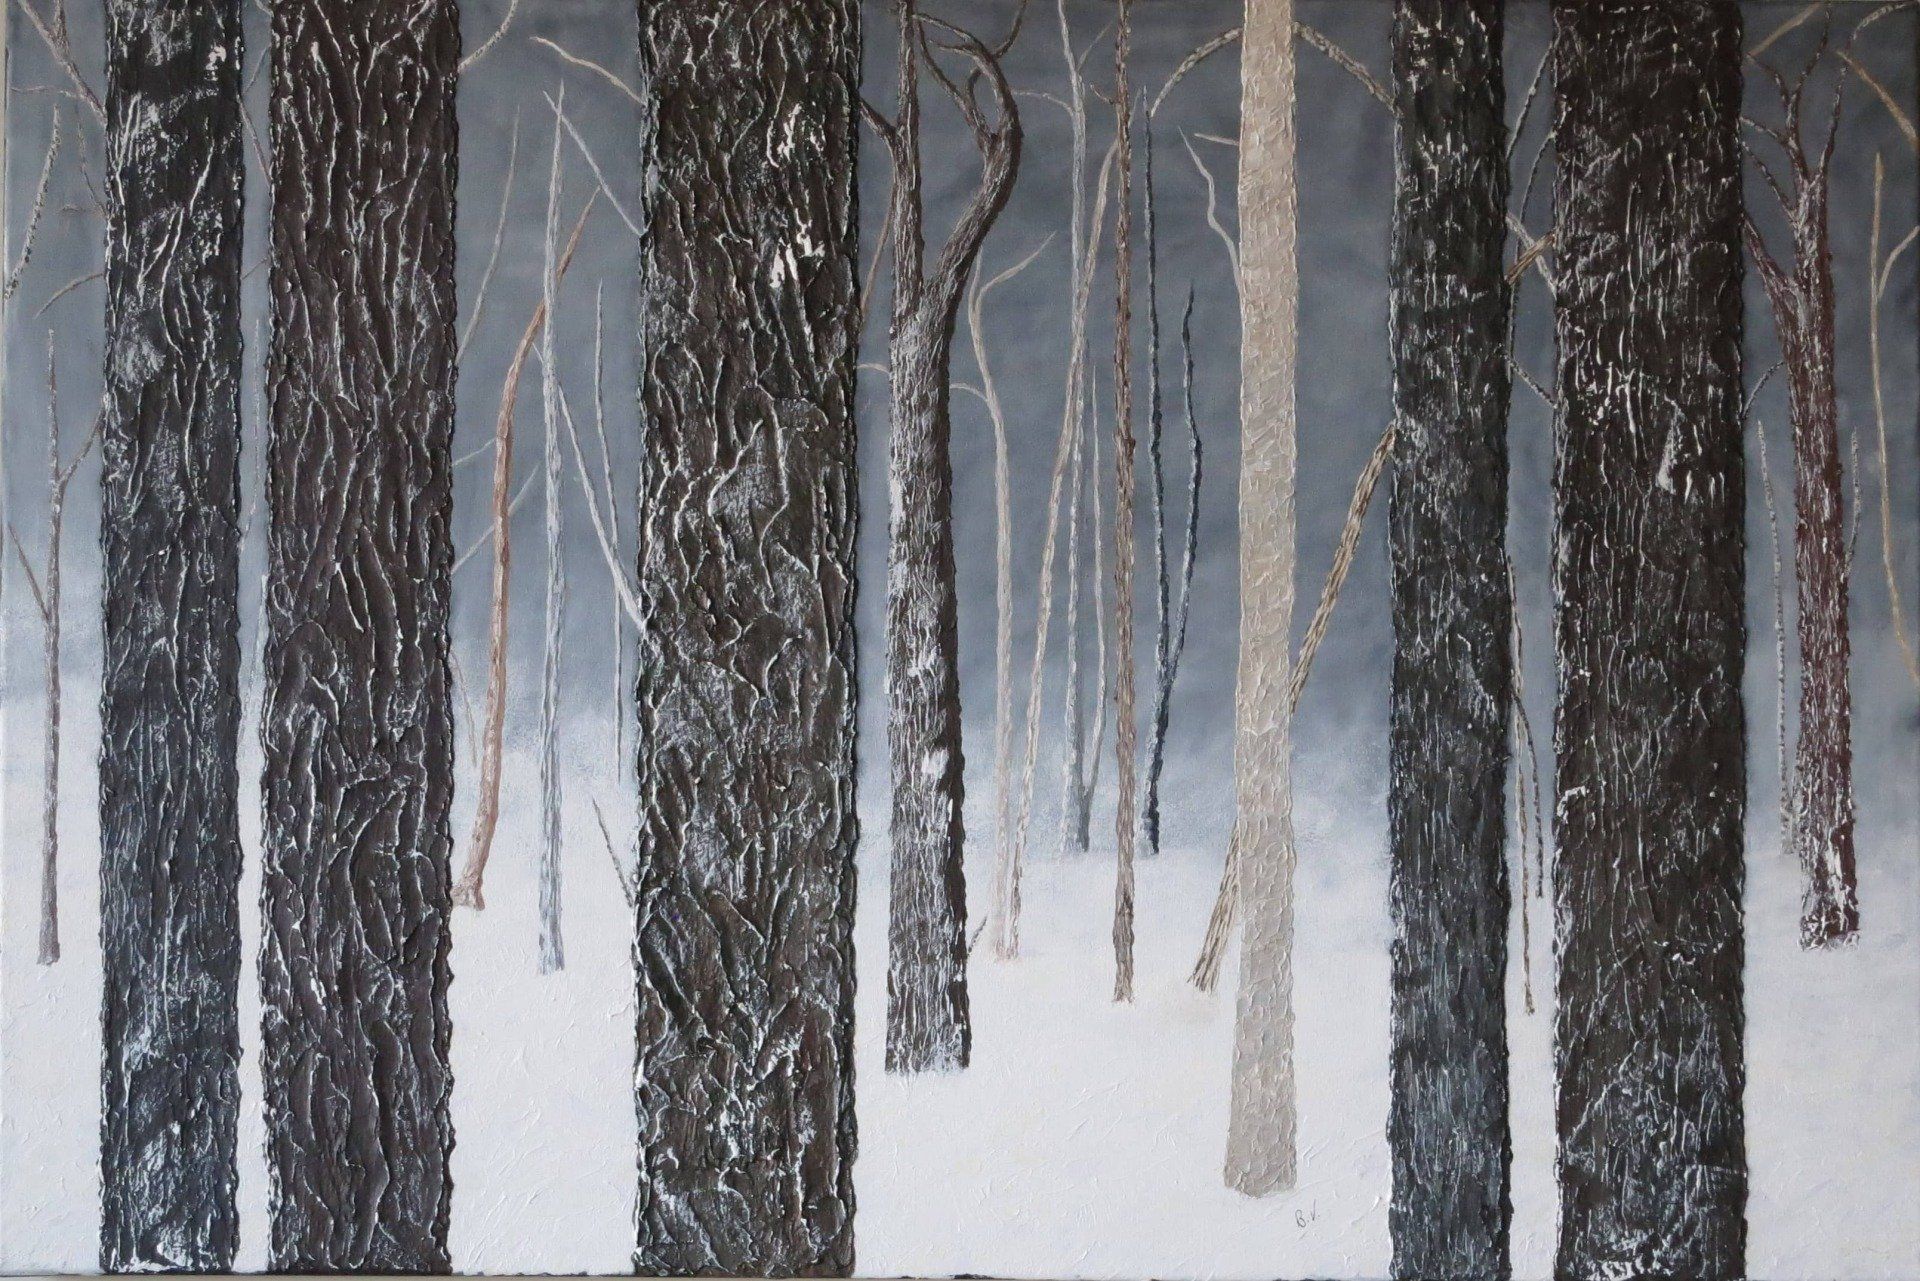 A winter forest scene of large tree trunks in the foreground and smaller trees in the mid field. The backgroung is moody yet calming as a wash of white gesso covers the black gesso. The forest ground is covered in snow. This piece is in a private collection.